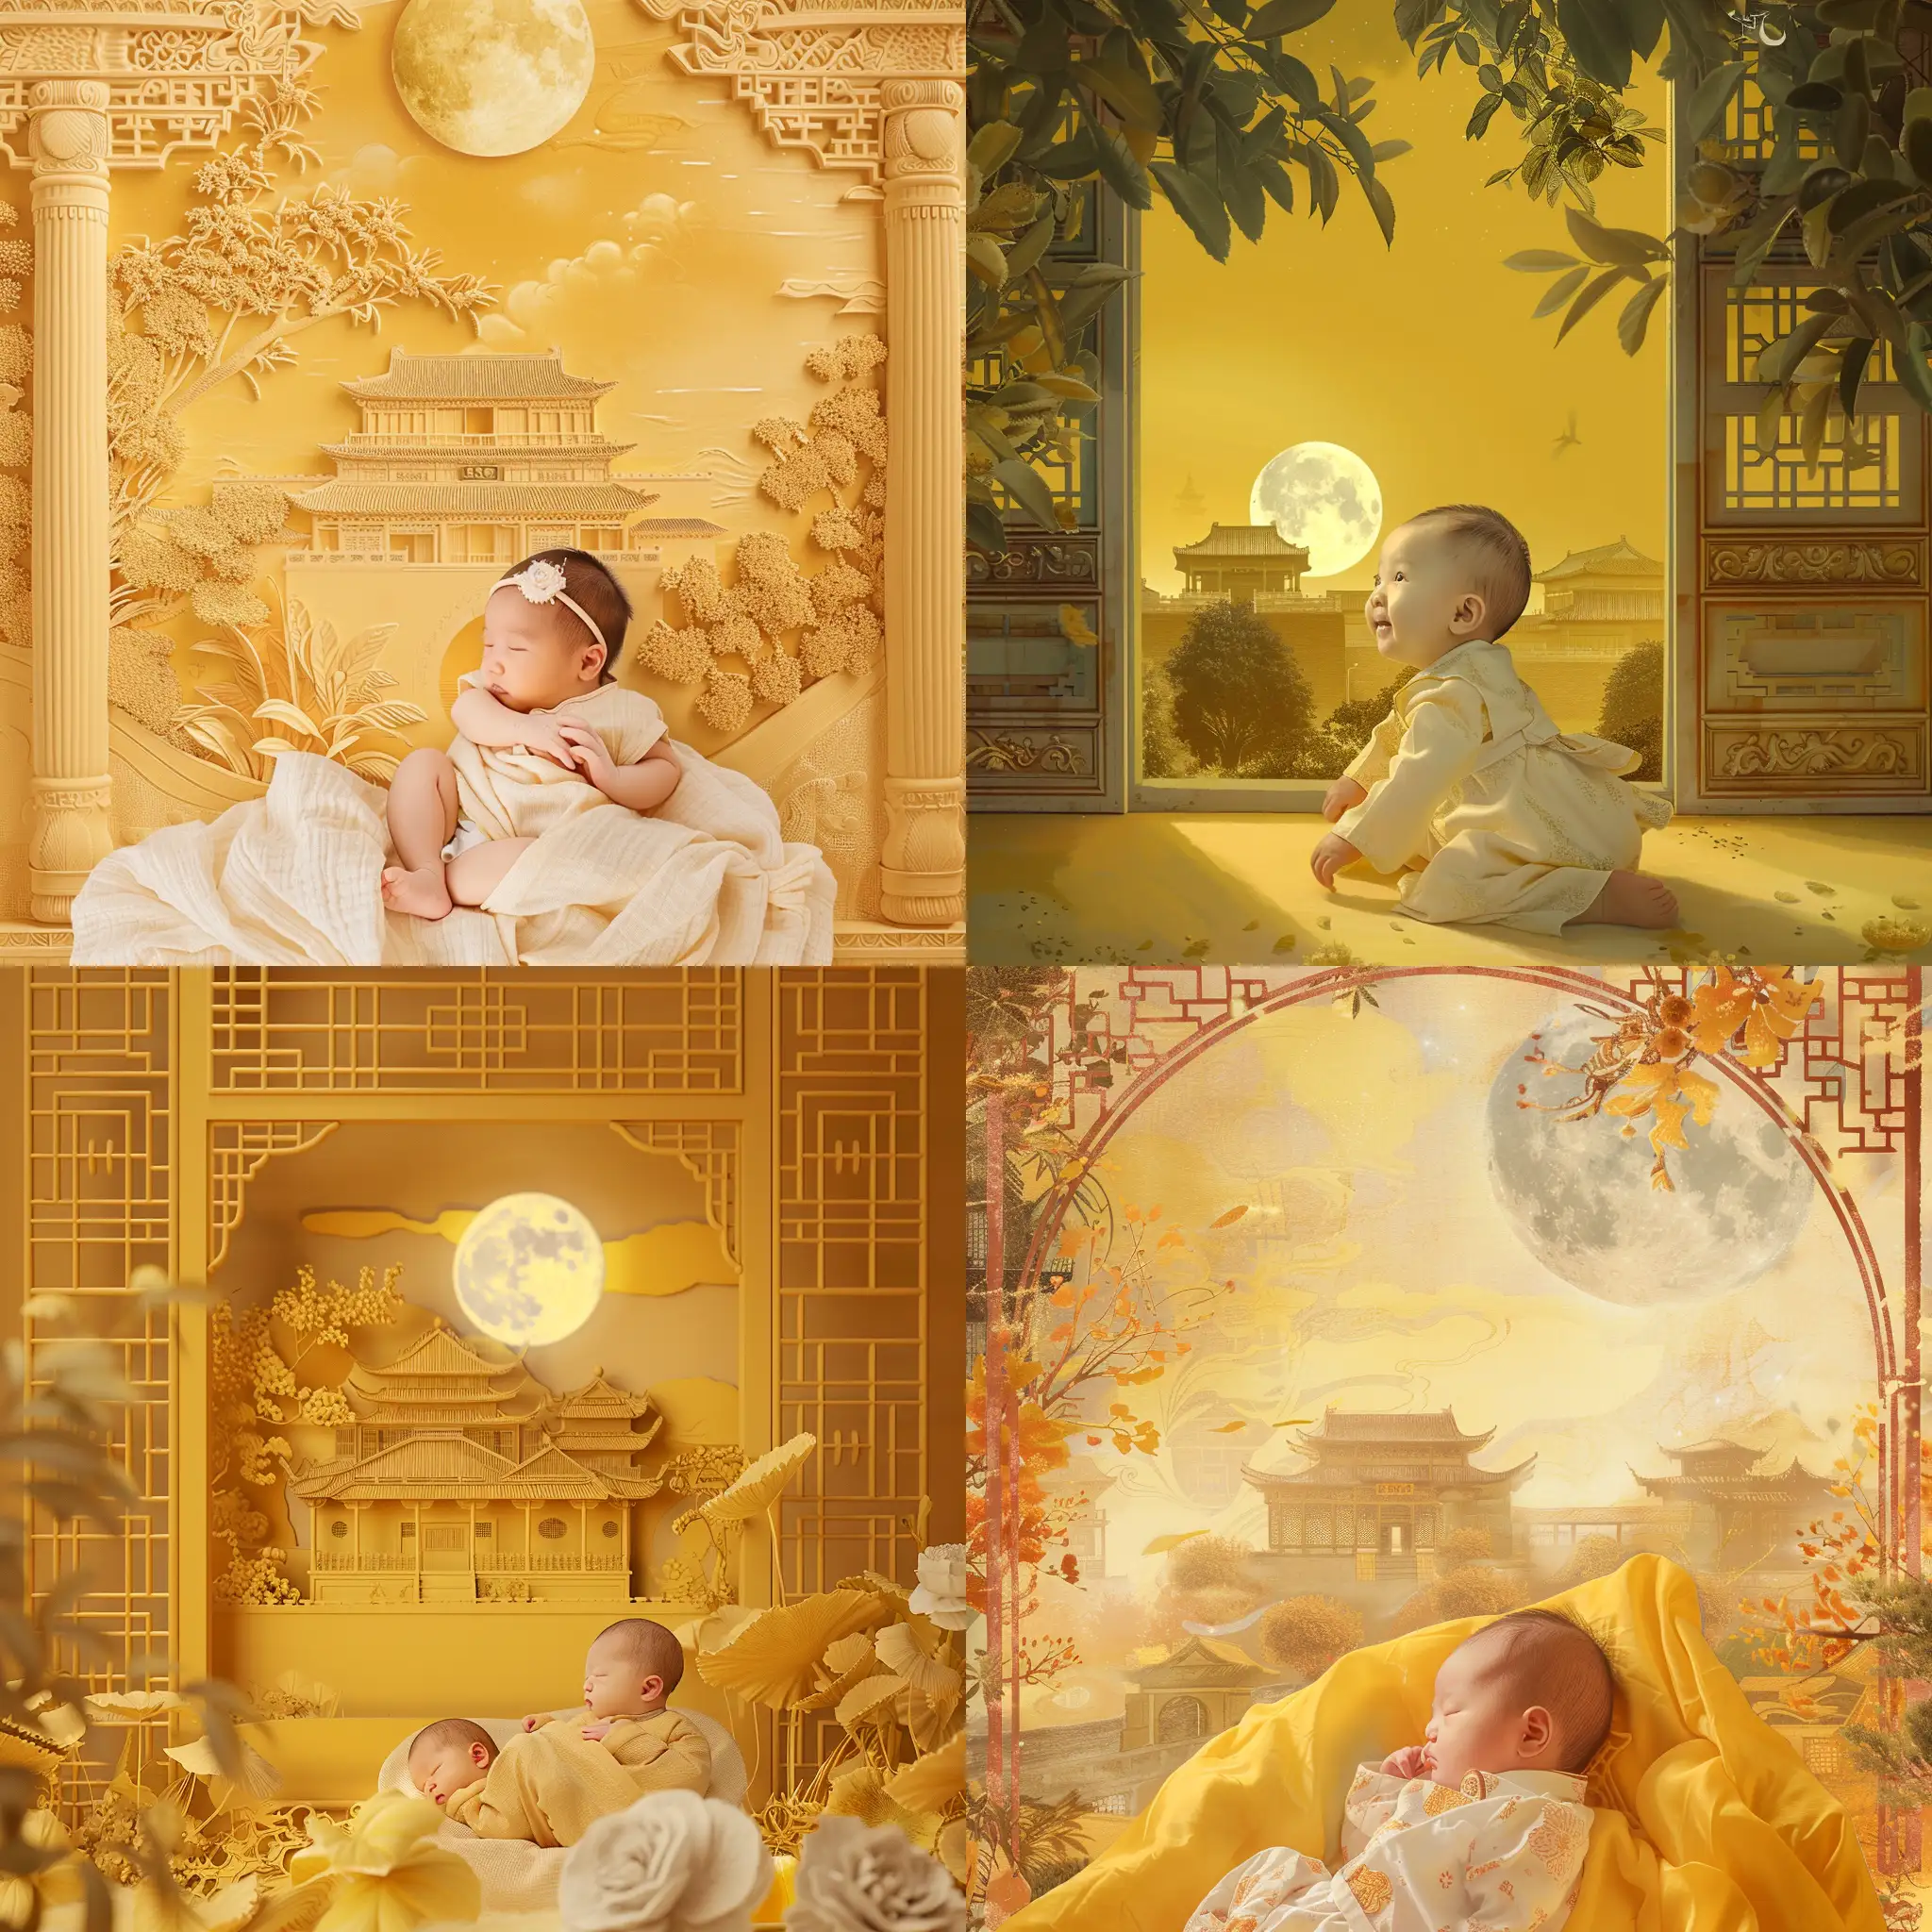 In the heart of Guangdong's Shunde, an infant is born within the venerable walls of an ancestral home. This moment, captured in a blend of styles, marries commercial shooting aesthetics with a tender yellow hue reminiscent of the Mid-Autumn Festival. The backdrop, inspired by the architectural grandeur of the Forbidden City, is rendered in ultra HD for an exhibition stand or booth shooting scenario. Fresh, Chinese-style elements frame the scene, under a moon that echoes the festive spirit. The composition is attractive, featuring realistic colors that transport the viewer to a landscape painting, alive with the charm and heritage of China.